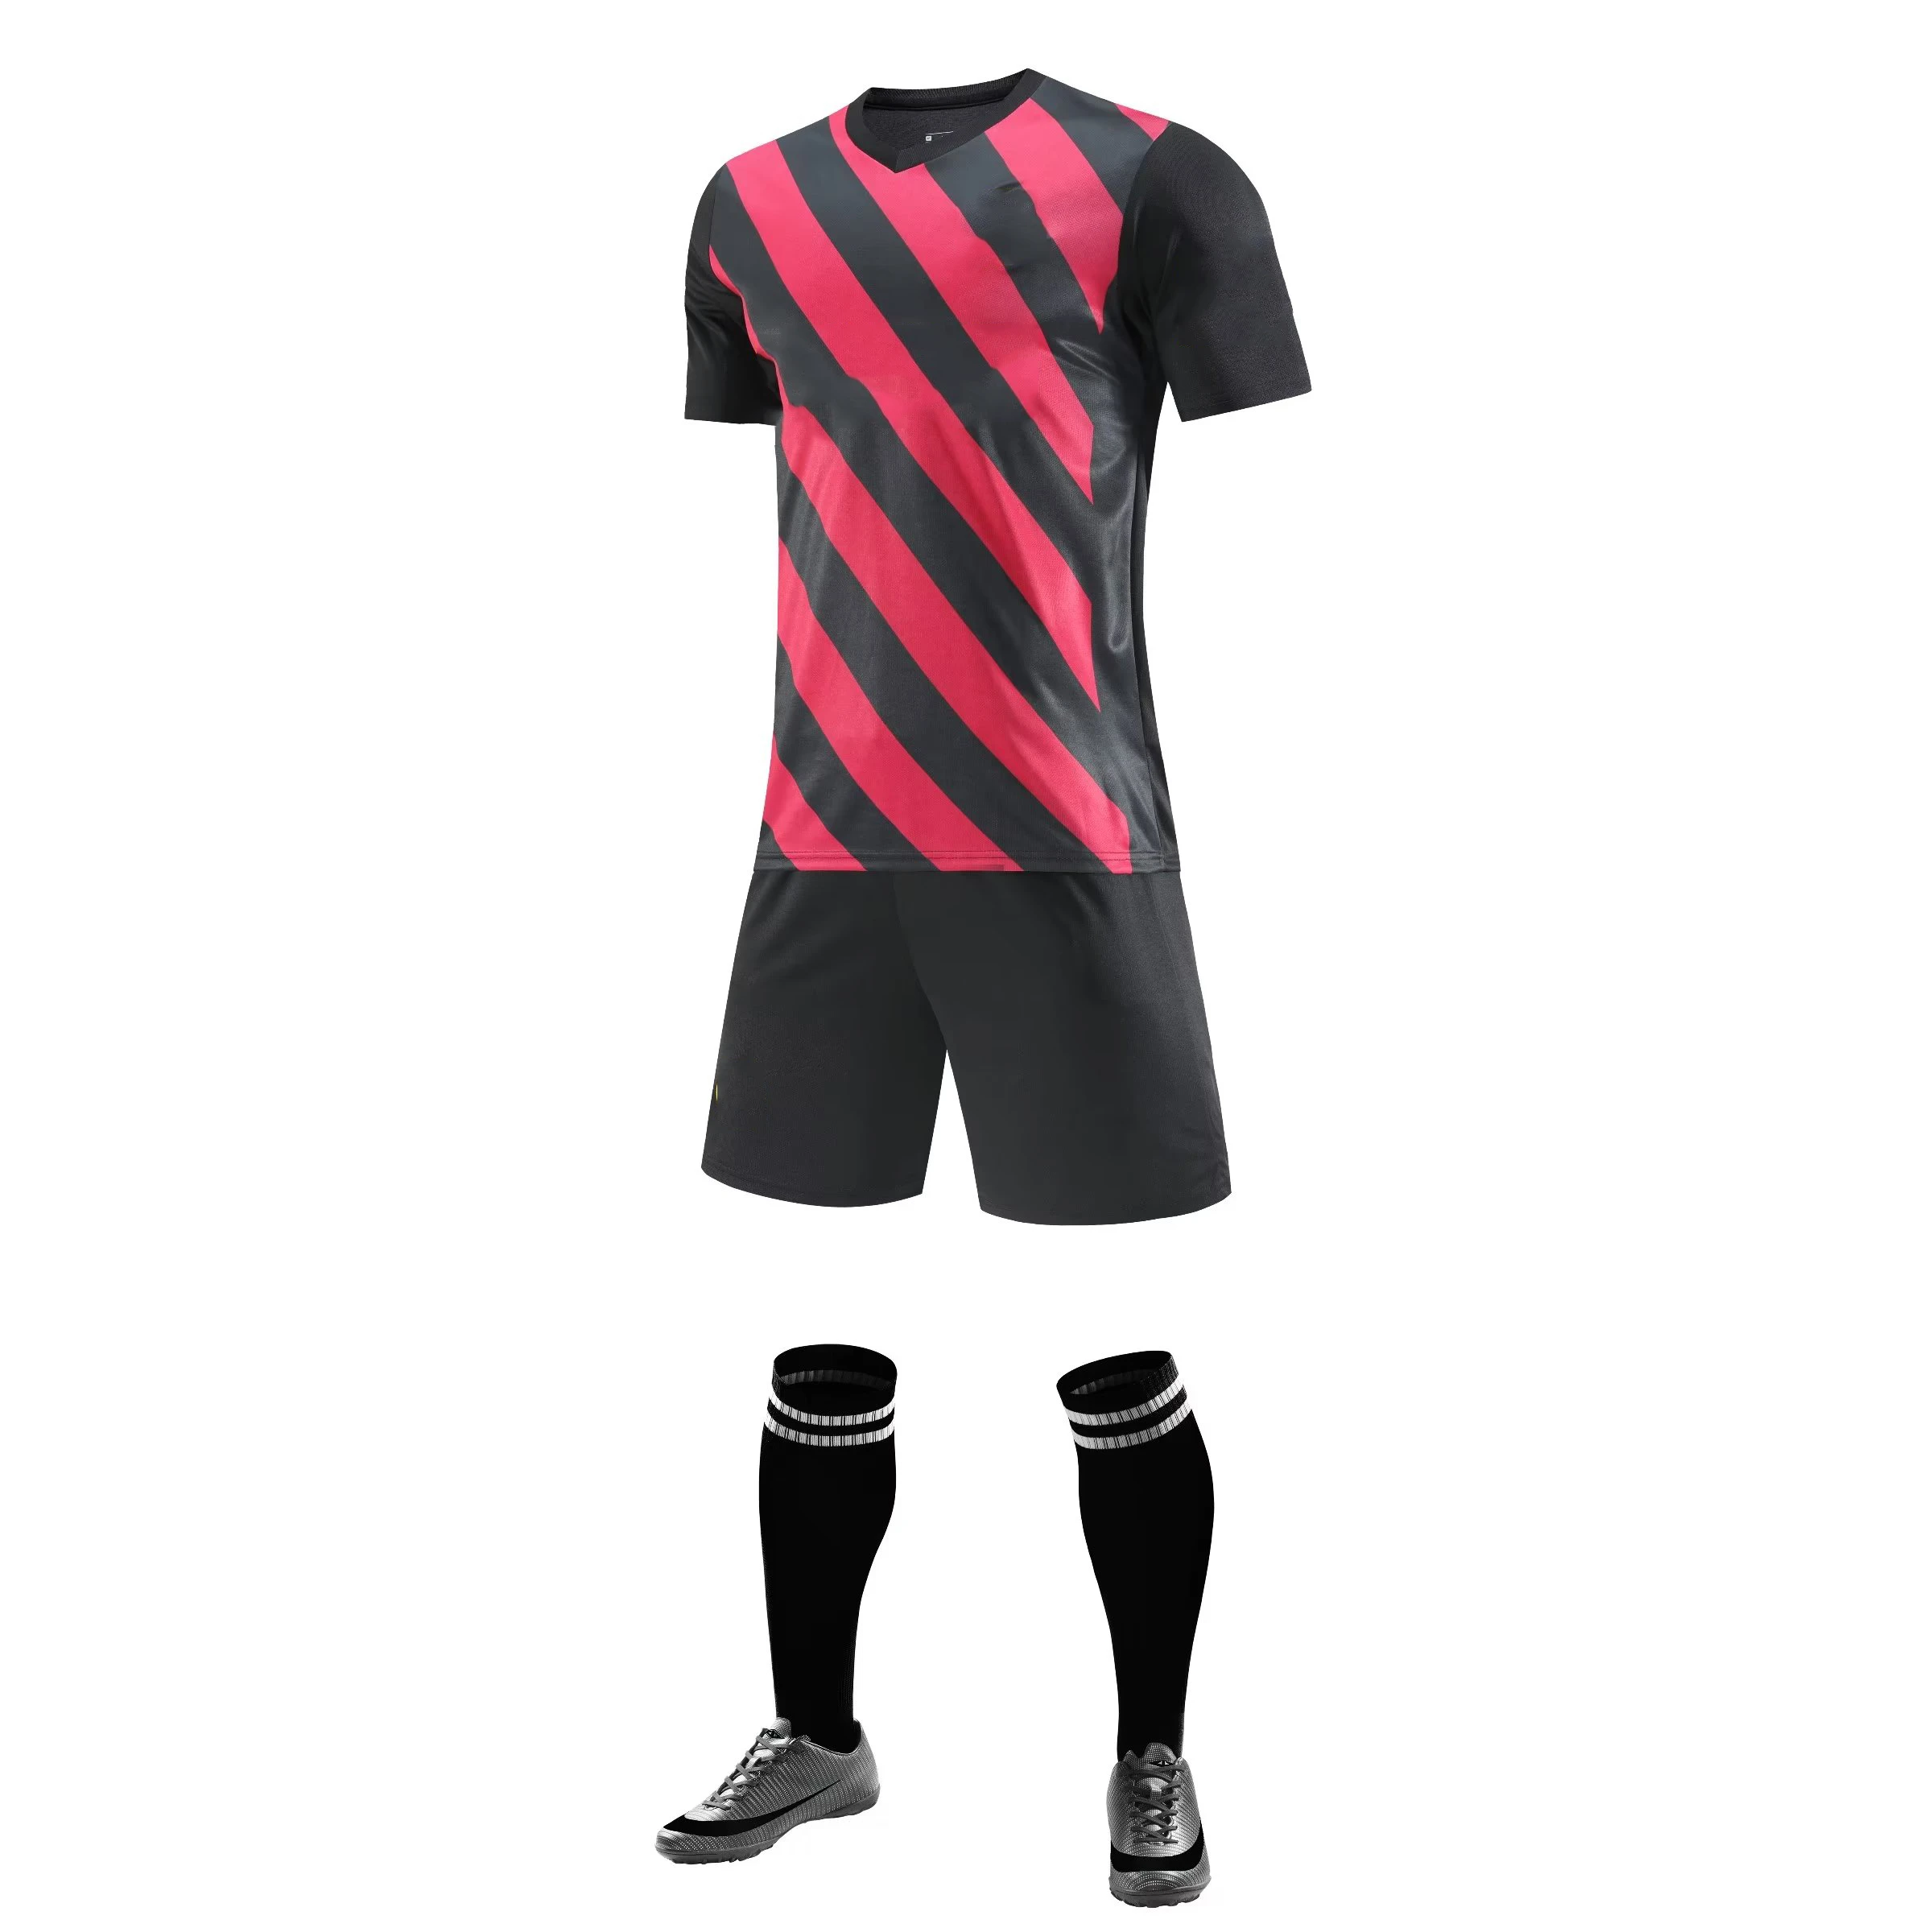 Dominate the field with the 2023 New Design Ignis Soccer Uniforms. These custom football soccer jerseys are designed to impress